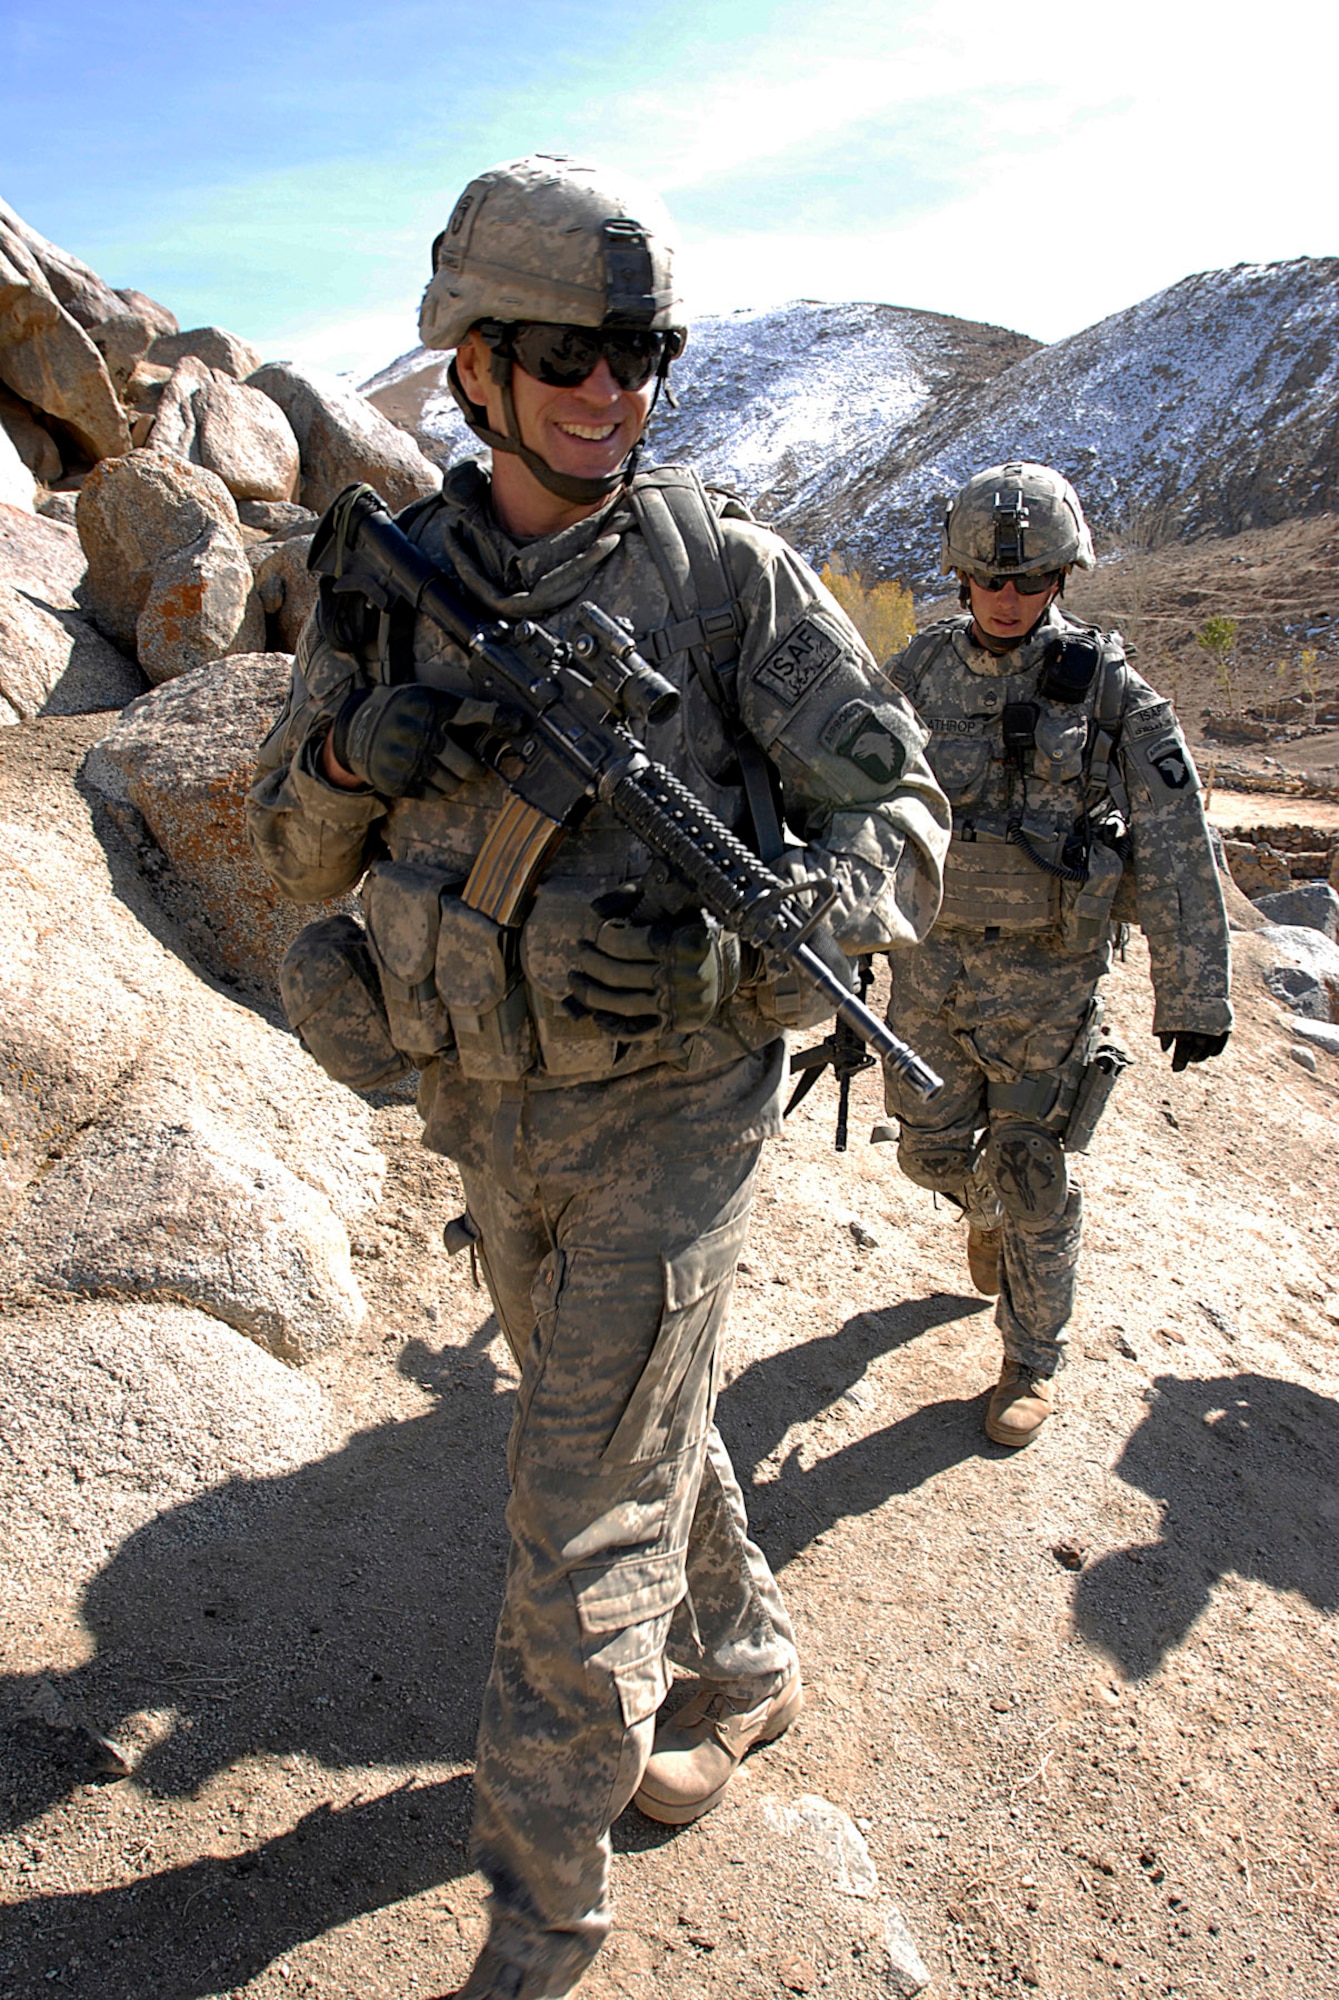 Spirits were high as Soldiers with Alpha Company, 101st Division Special Troops Battalion, 101st Airborne Division, scale a hillside during an air assault mission into a narrow valley in eastern Afghanistan, Nov. 4, 2008.  The Soldiers conducted a search of a small village in a valley, looking for IED making materials.  (Photo by Spc. Mary L. Gonzalez, CJTF-101 Public Affairs)